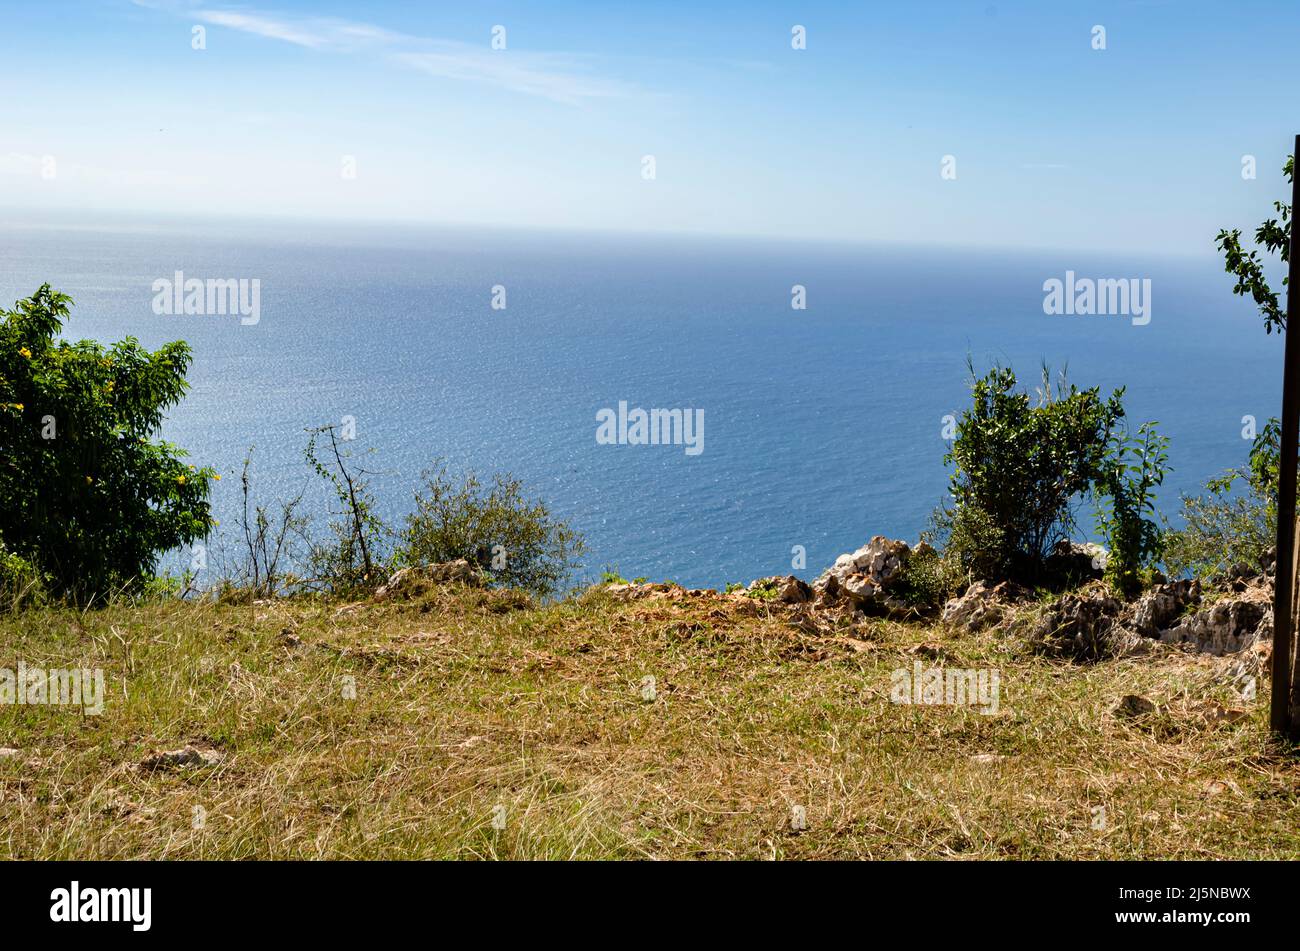 Low grass covers the landscape leading to the rocky edge bordering the sea that meets the sky. Stock Photo